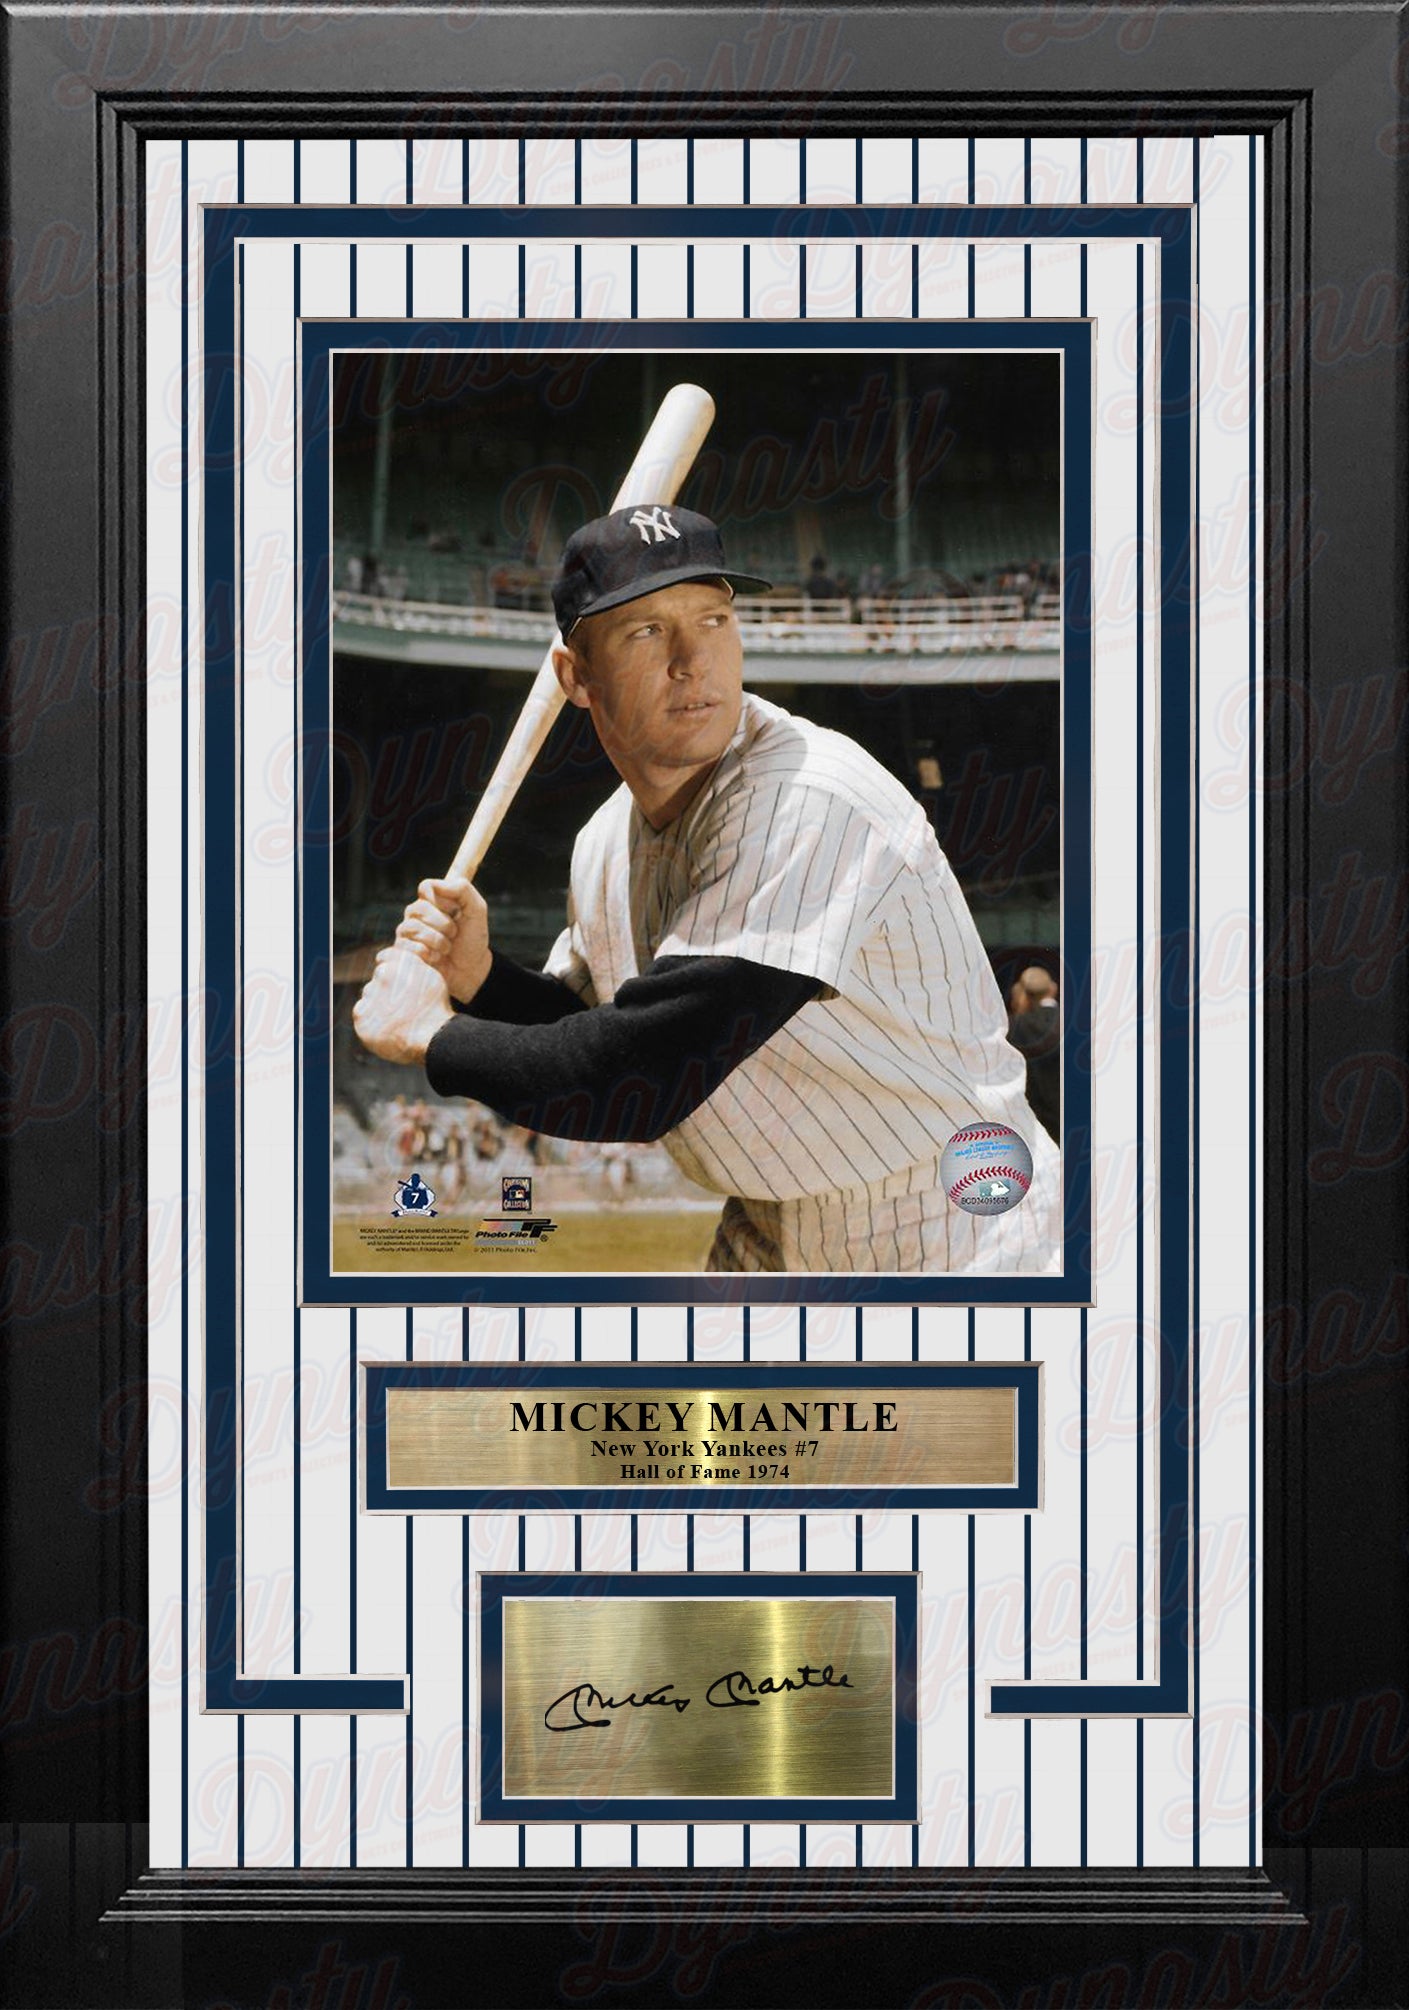 Mickey Mantle in Color New York Yankees 8" x 10" Framed Baseball Photo with Engraved Autograph - Dynasty Sports & Framing 